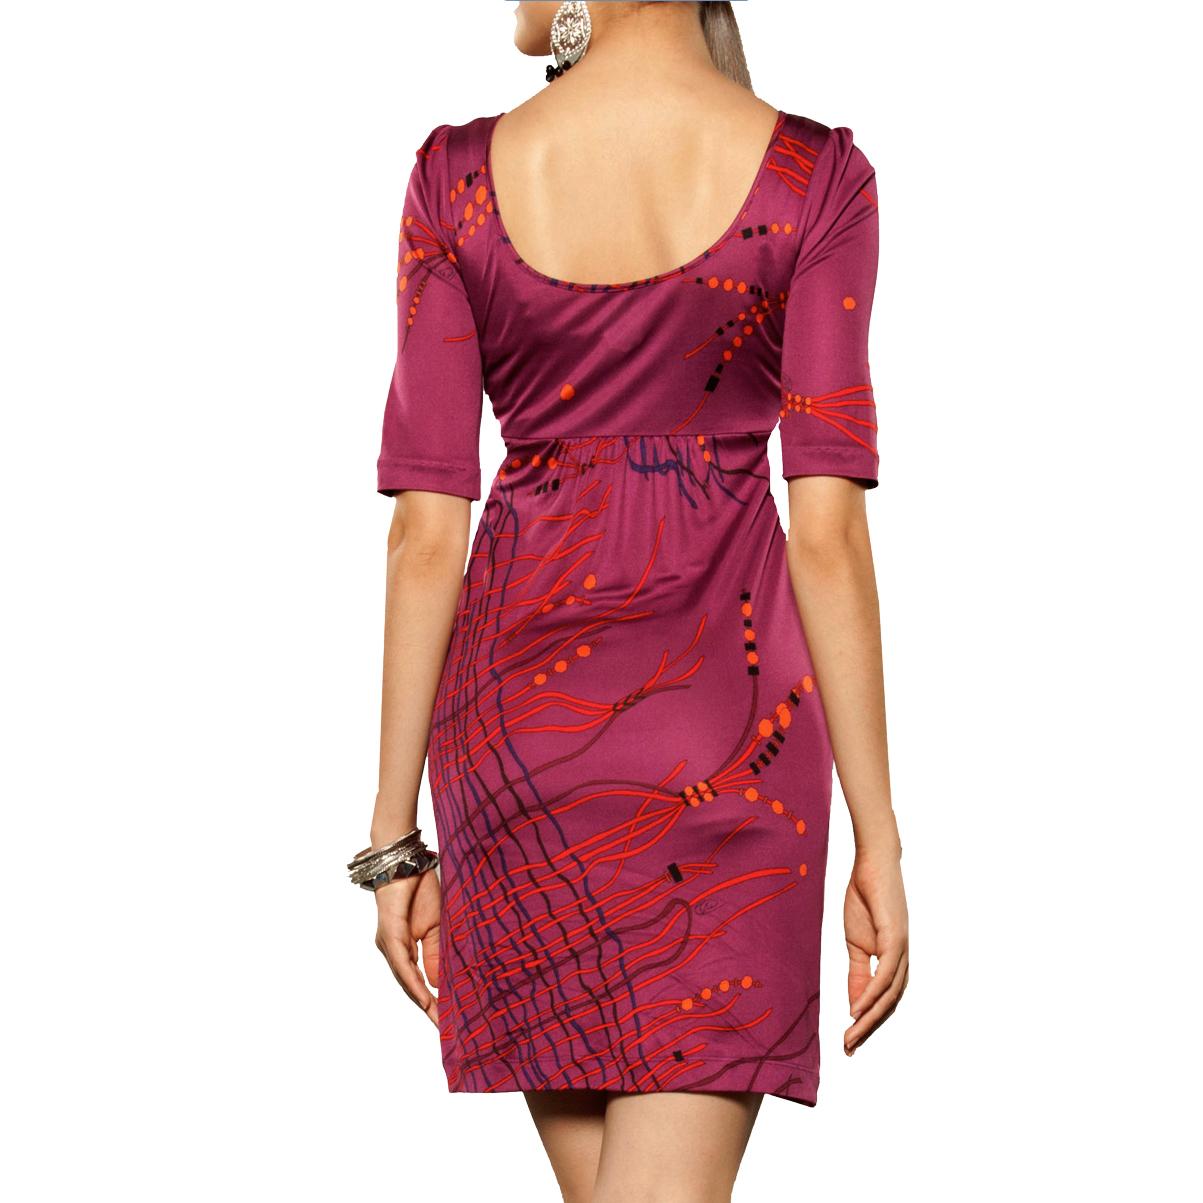 From FLORA KUNG collection - New with tag.
Easy dress in rich cranberry color. Signed Japanese tassel print.
Gentle puff sleeves,
Authentic FLORA KUNG silk dresses are made in premiere quality, long-filament silk yarn which gives a natural simmering